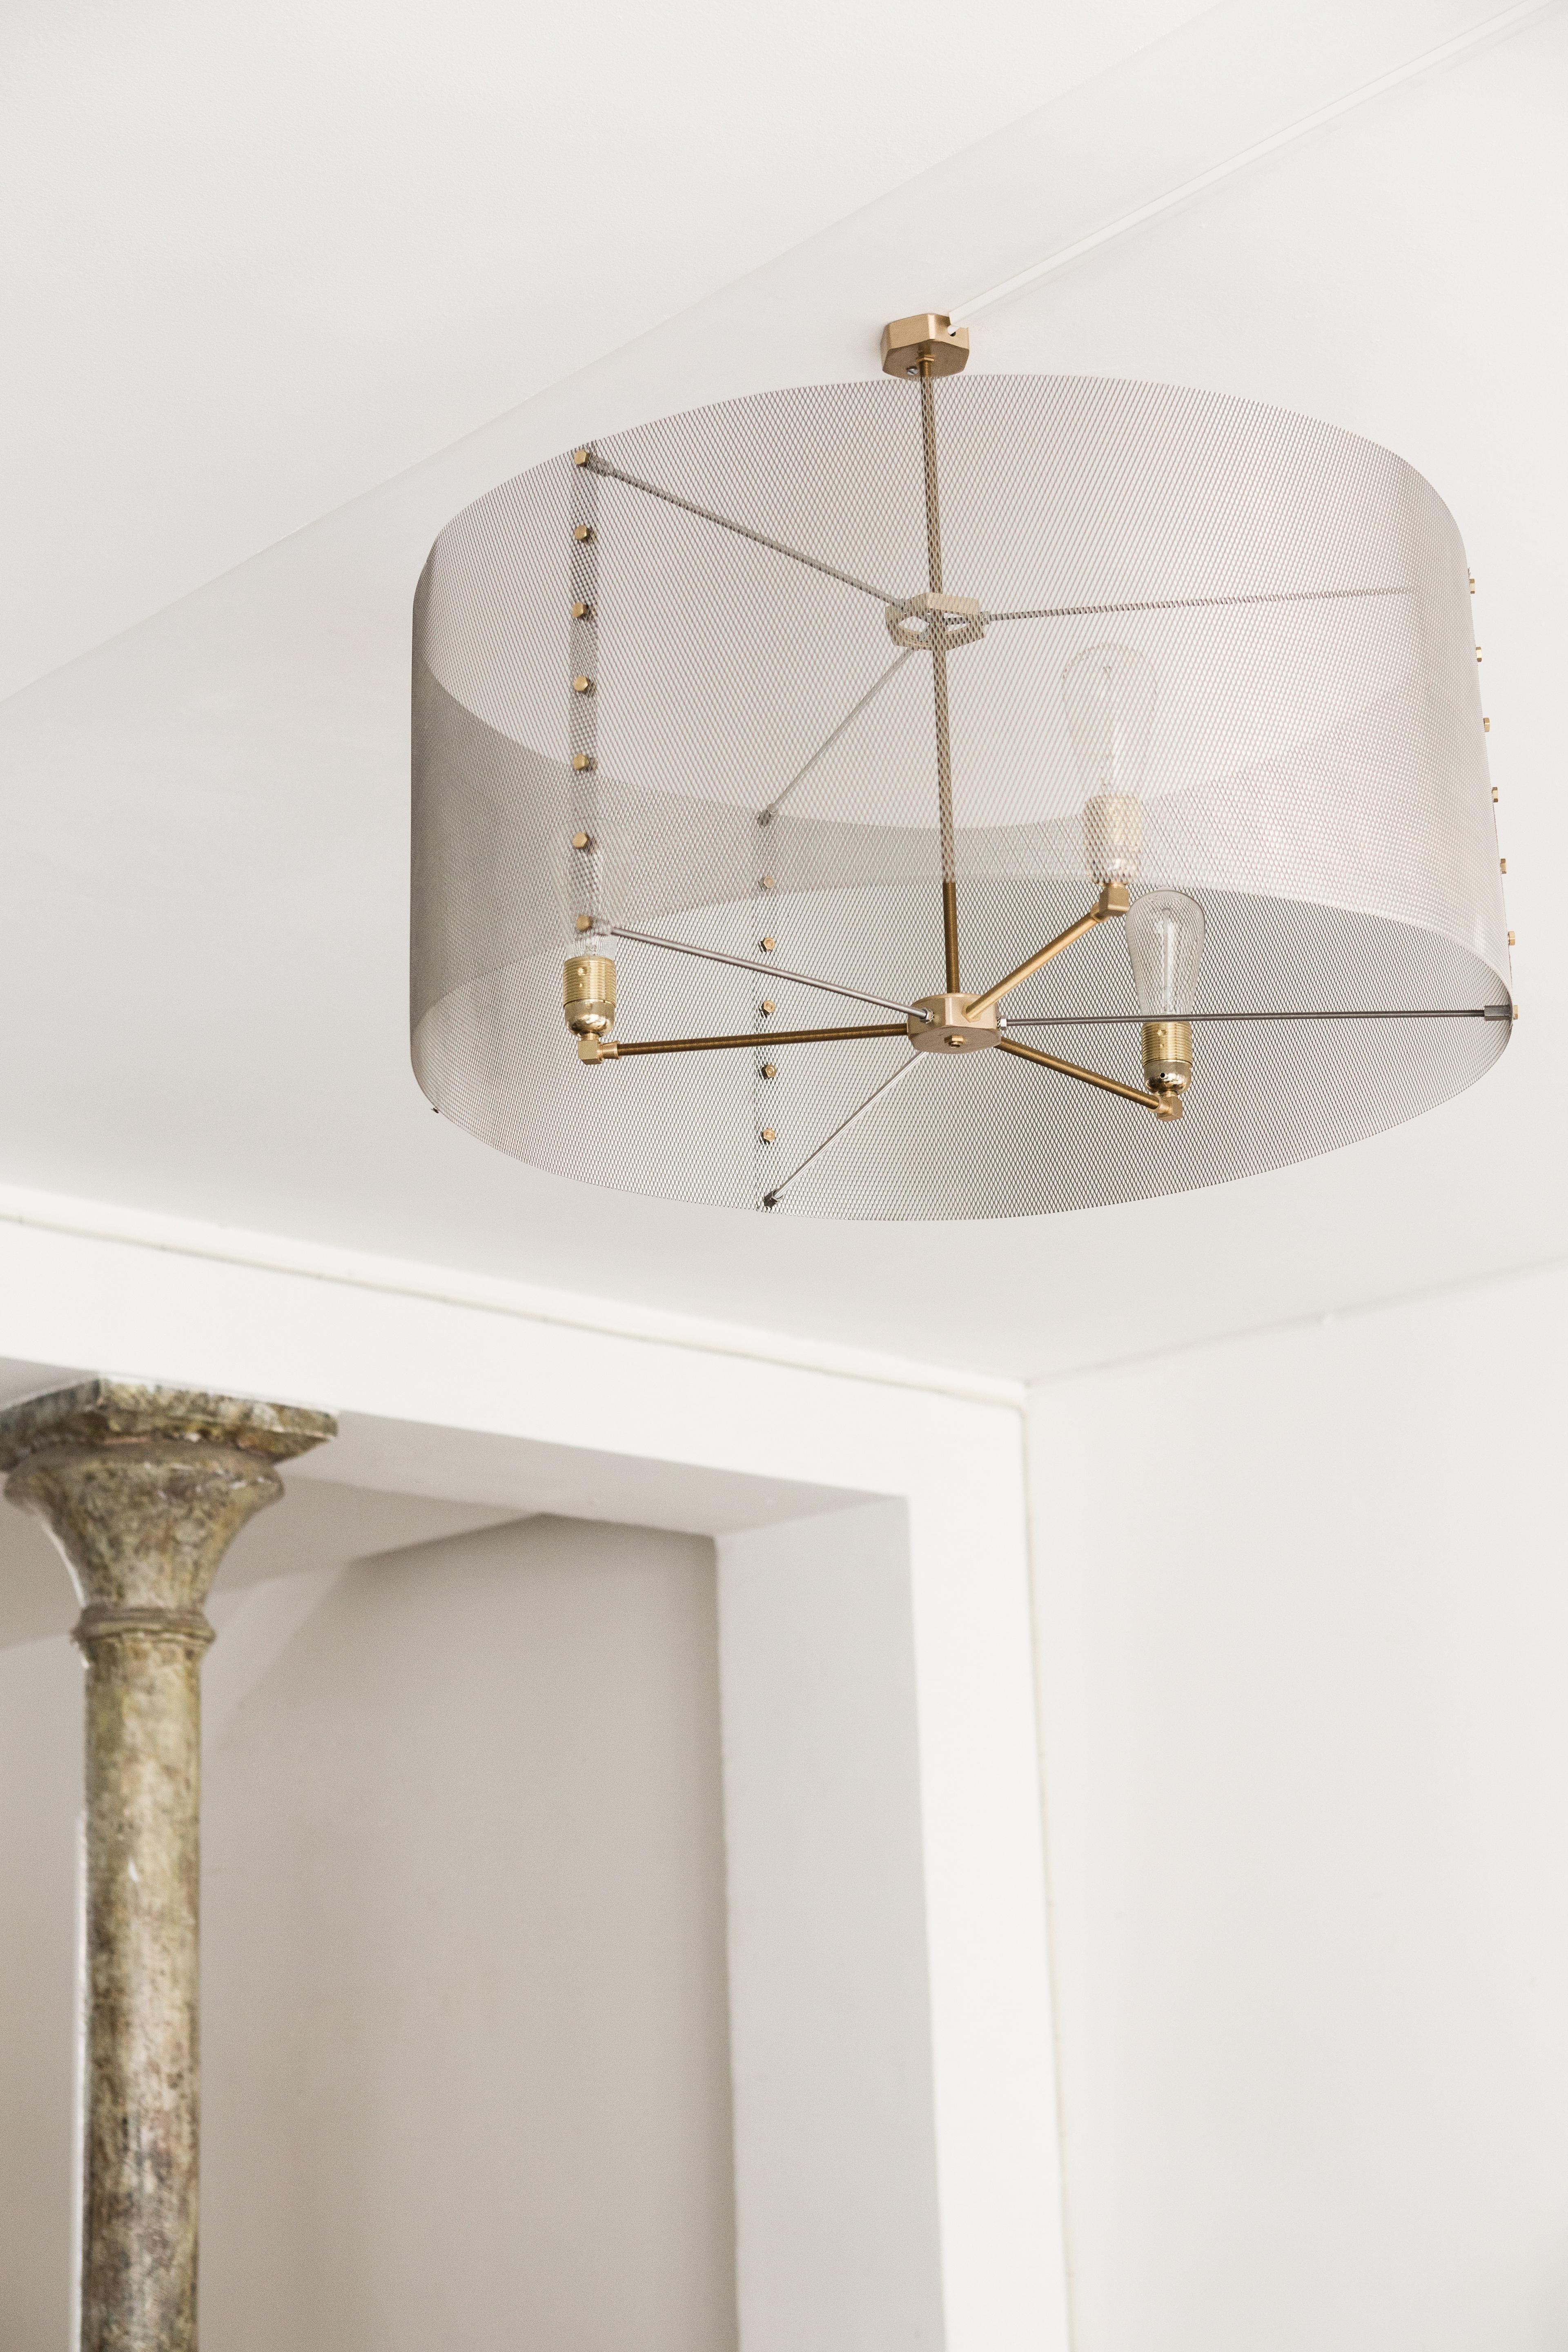 These Trapenard chandelier fit with elegance in a contemporary interior, refined in their lines. 
The golden expanded metal shade diffuses an intimate light. They will be perfect for a dinner table or a bar.
Comforting lights, with